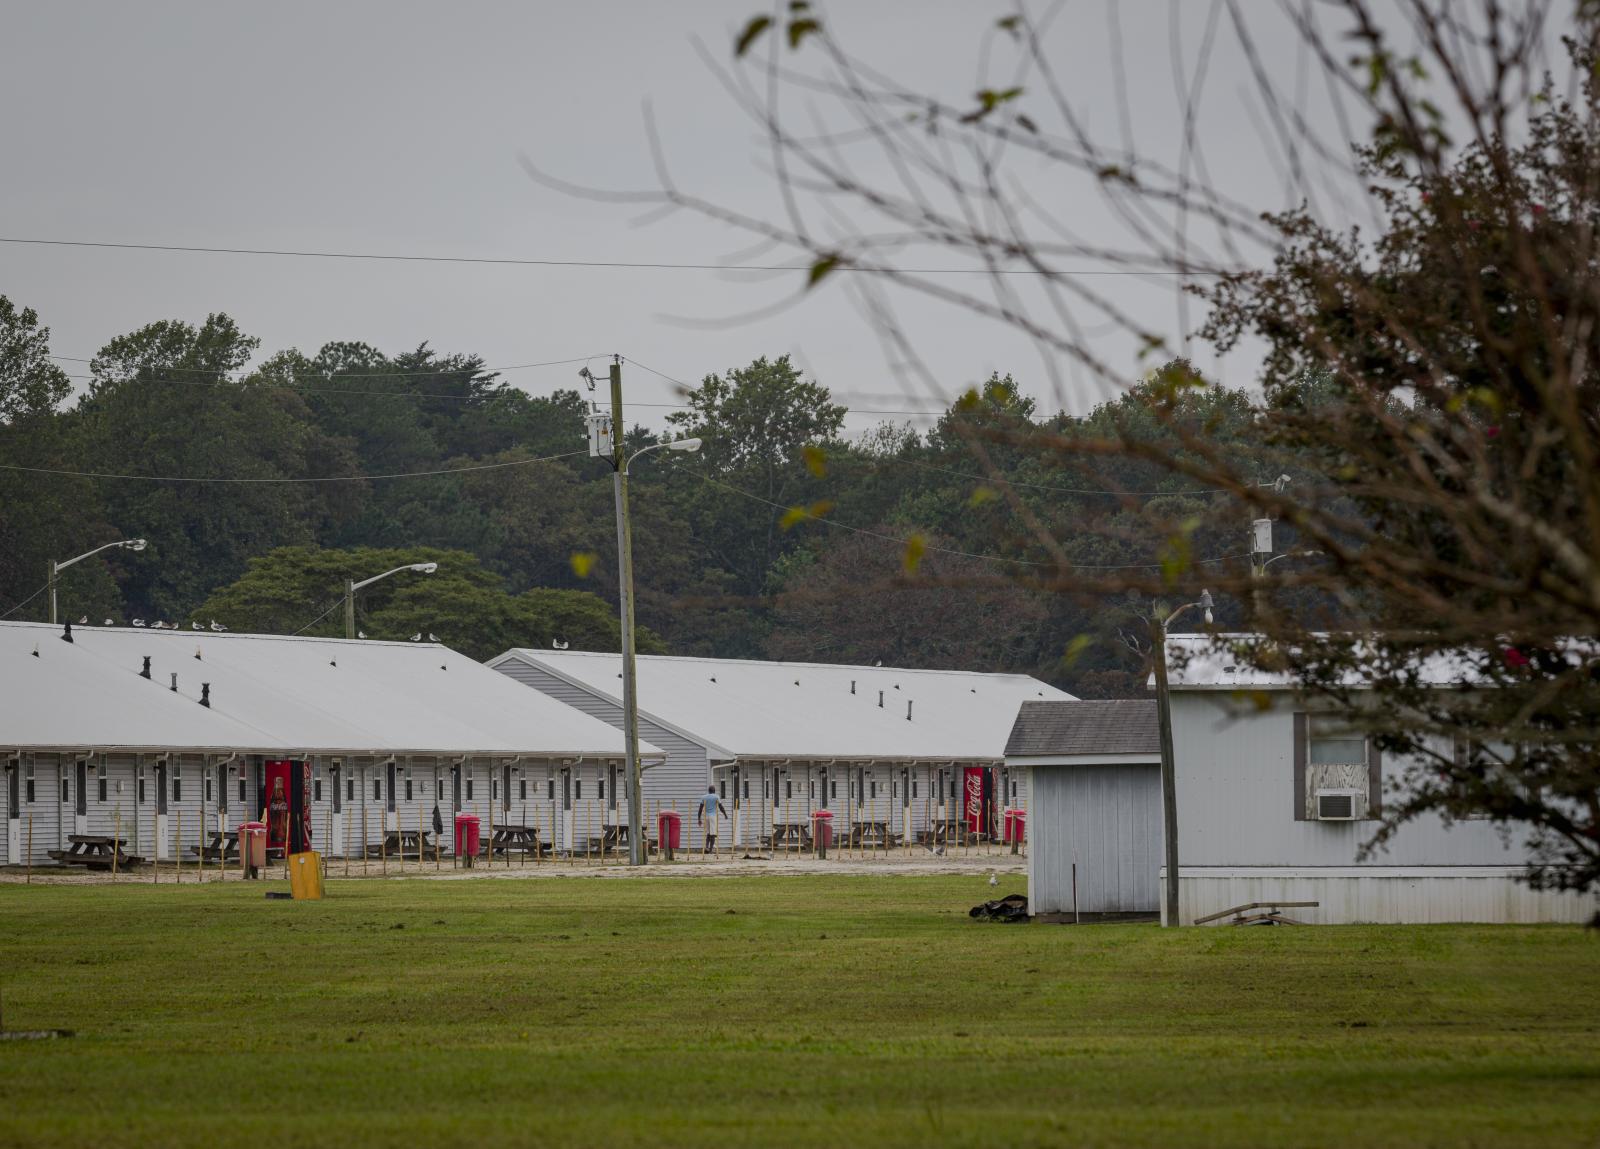 Migrant Workers Restricted to Farms Under One Growers Virus Lockdown - CHERITON, VA - September 26, 2020: Barracks where...